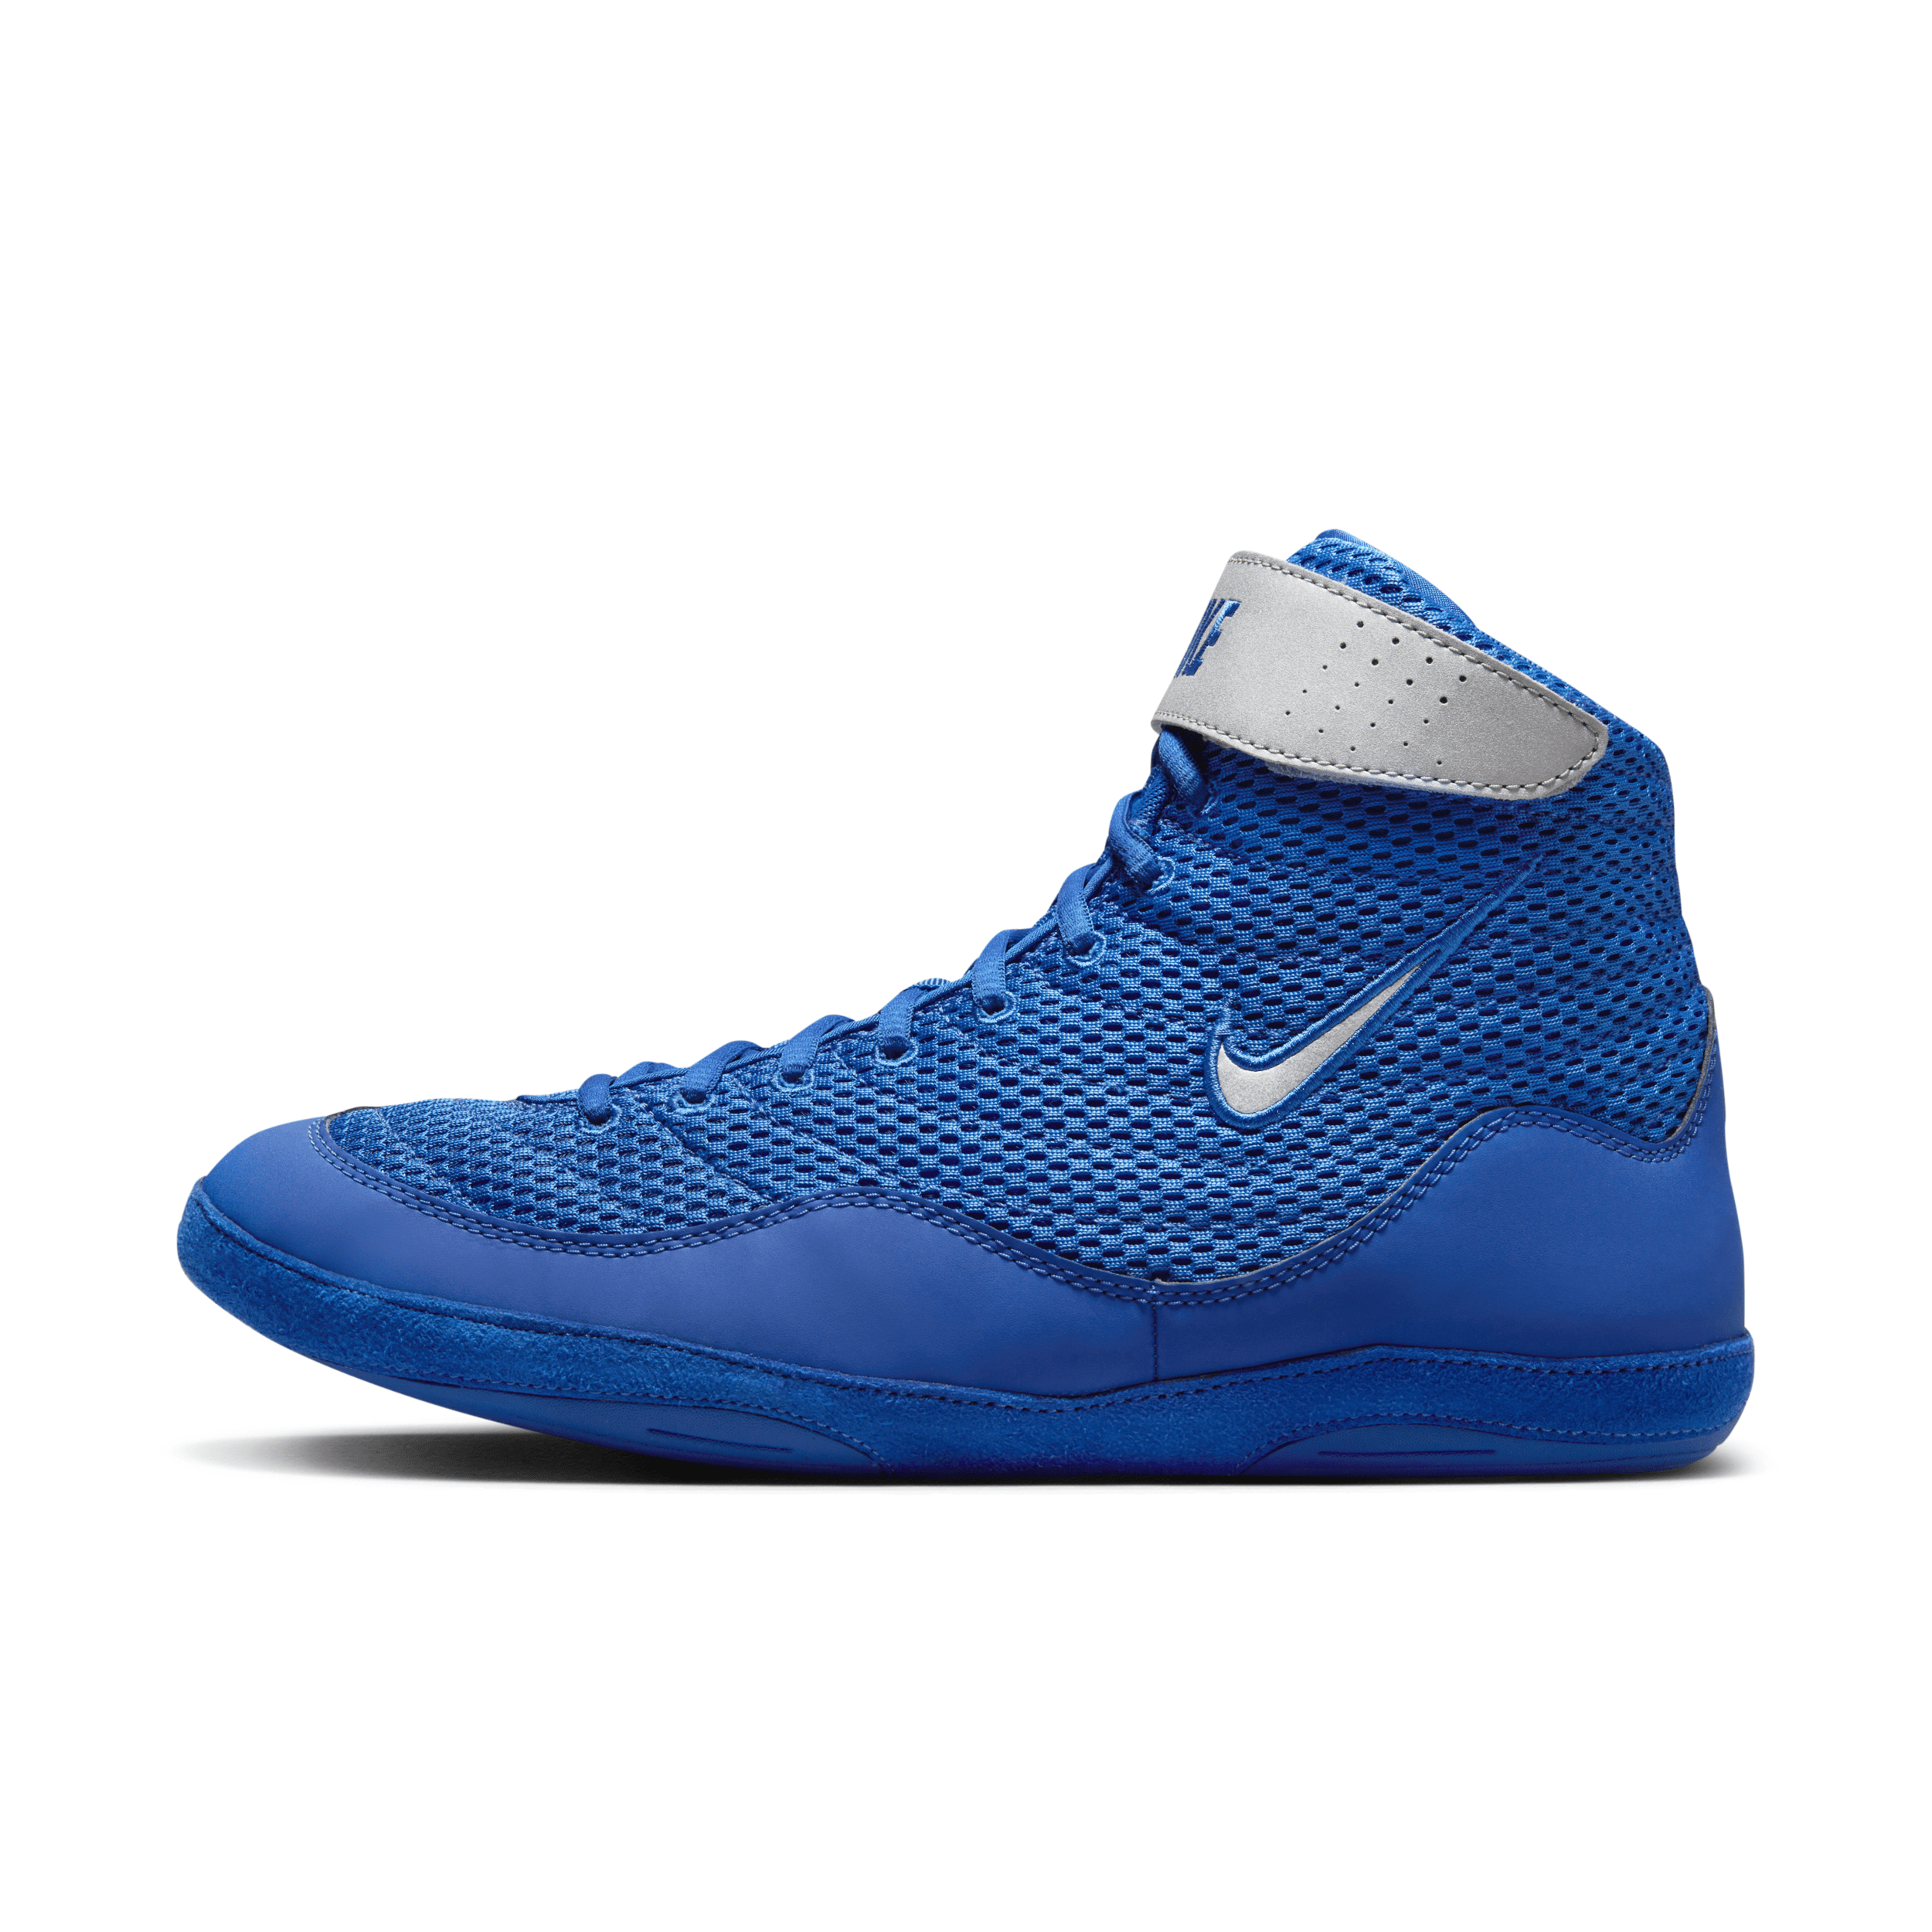 Nike Unisex Inflict Wrestling Shoes In Blue